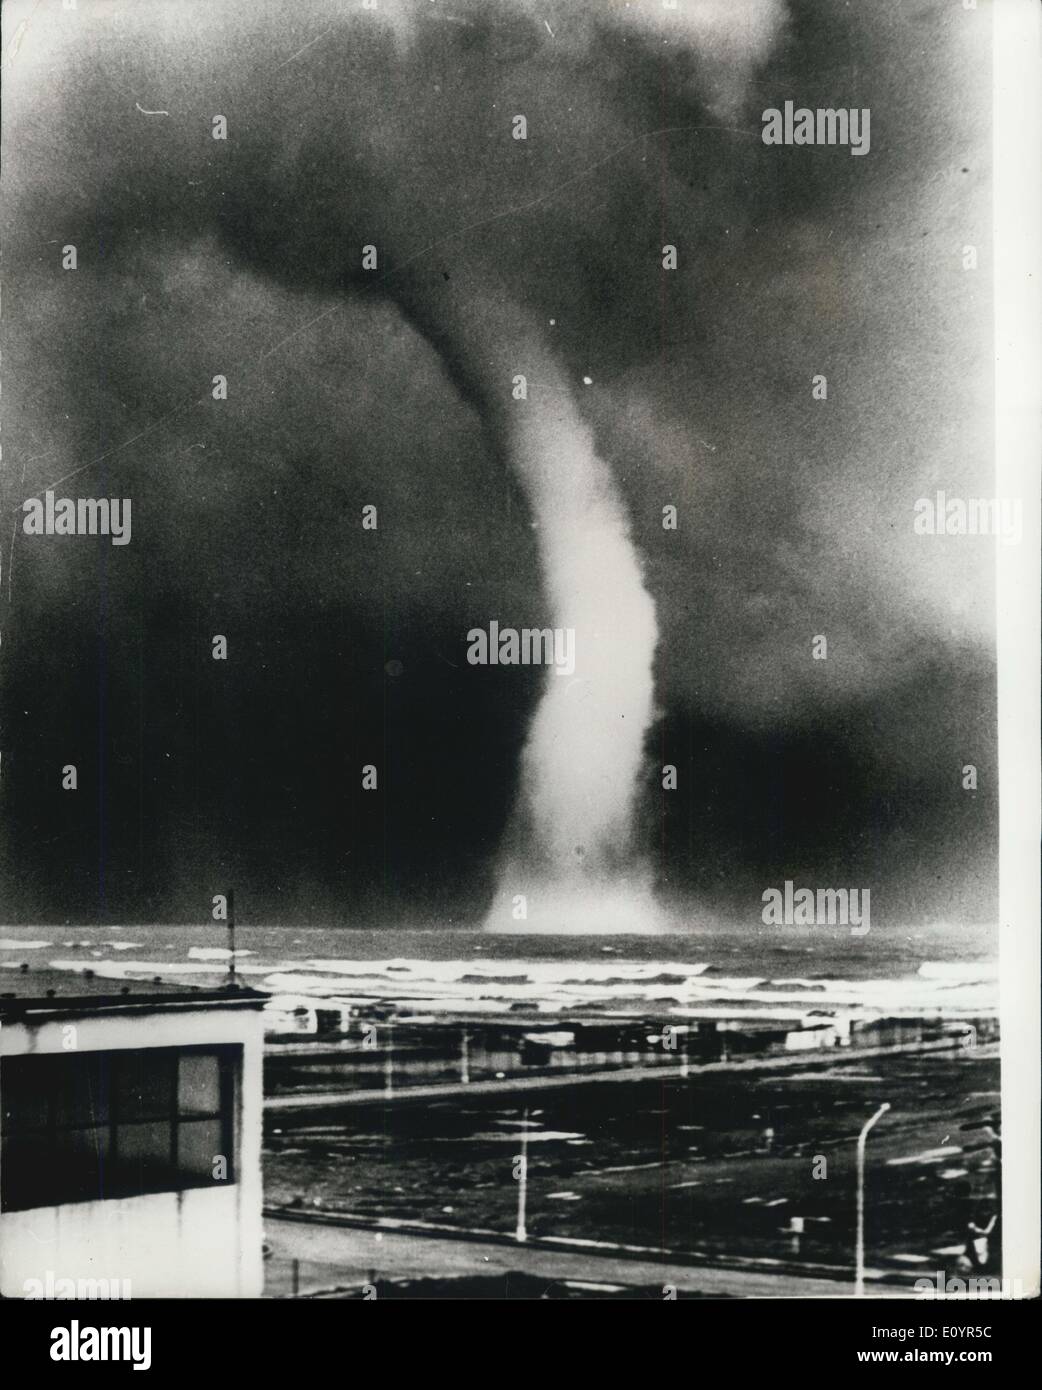 Mar. 15, 1971 - Impressive Picture Of Tornado: This impressive picture of the gigantic tornado of the sea, was taken off the coast of Malaga, Spain. The water reached a height of 500 metres and the photograph was taken by an amateur, Marlano Nubio Crel, of Malaga. Stock Photo